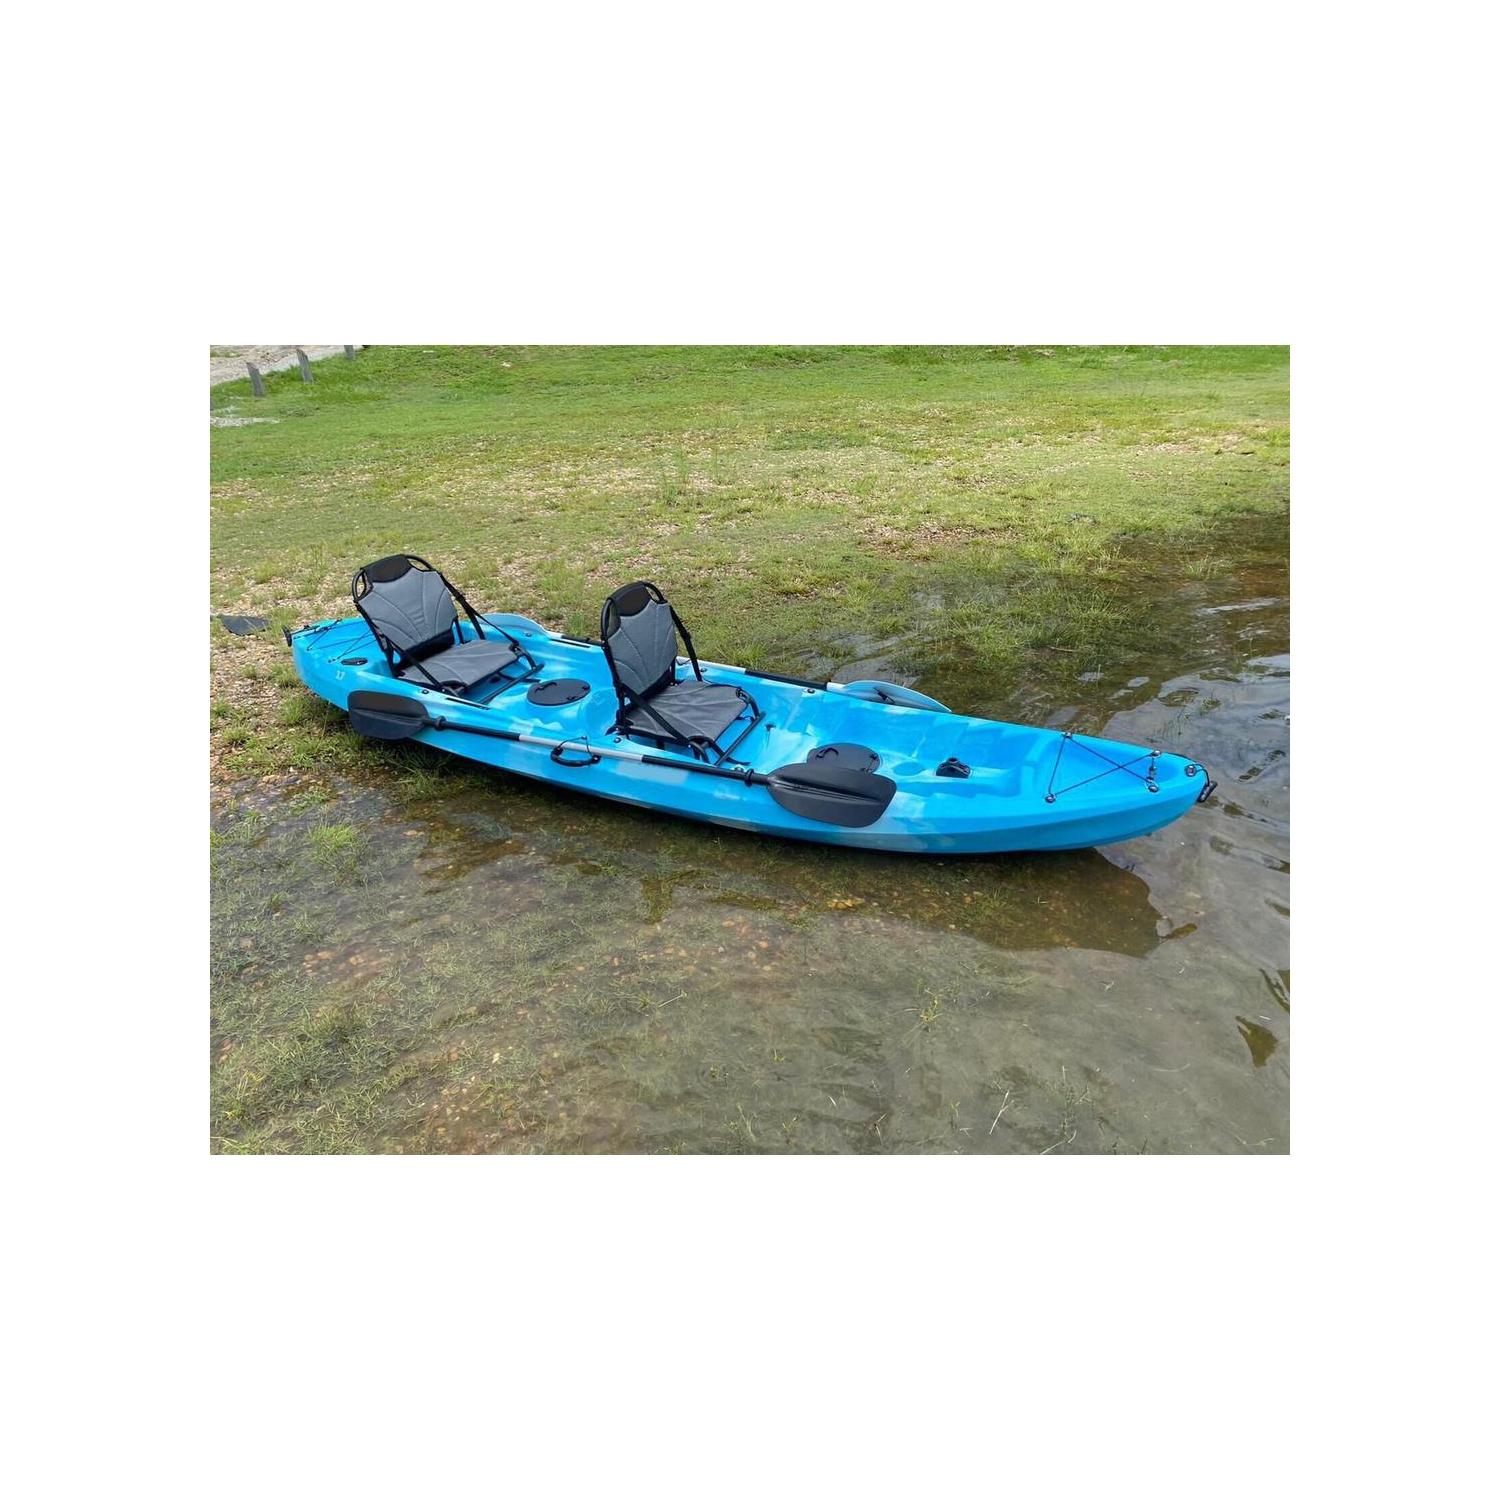 $999.99 for an RBSM Dolphin Pro Tandem Fishing Kayak